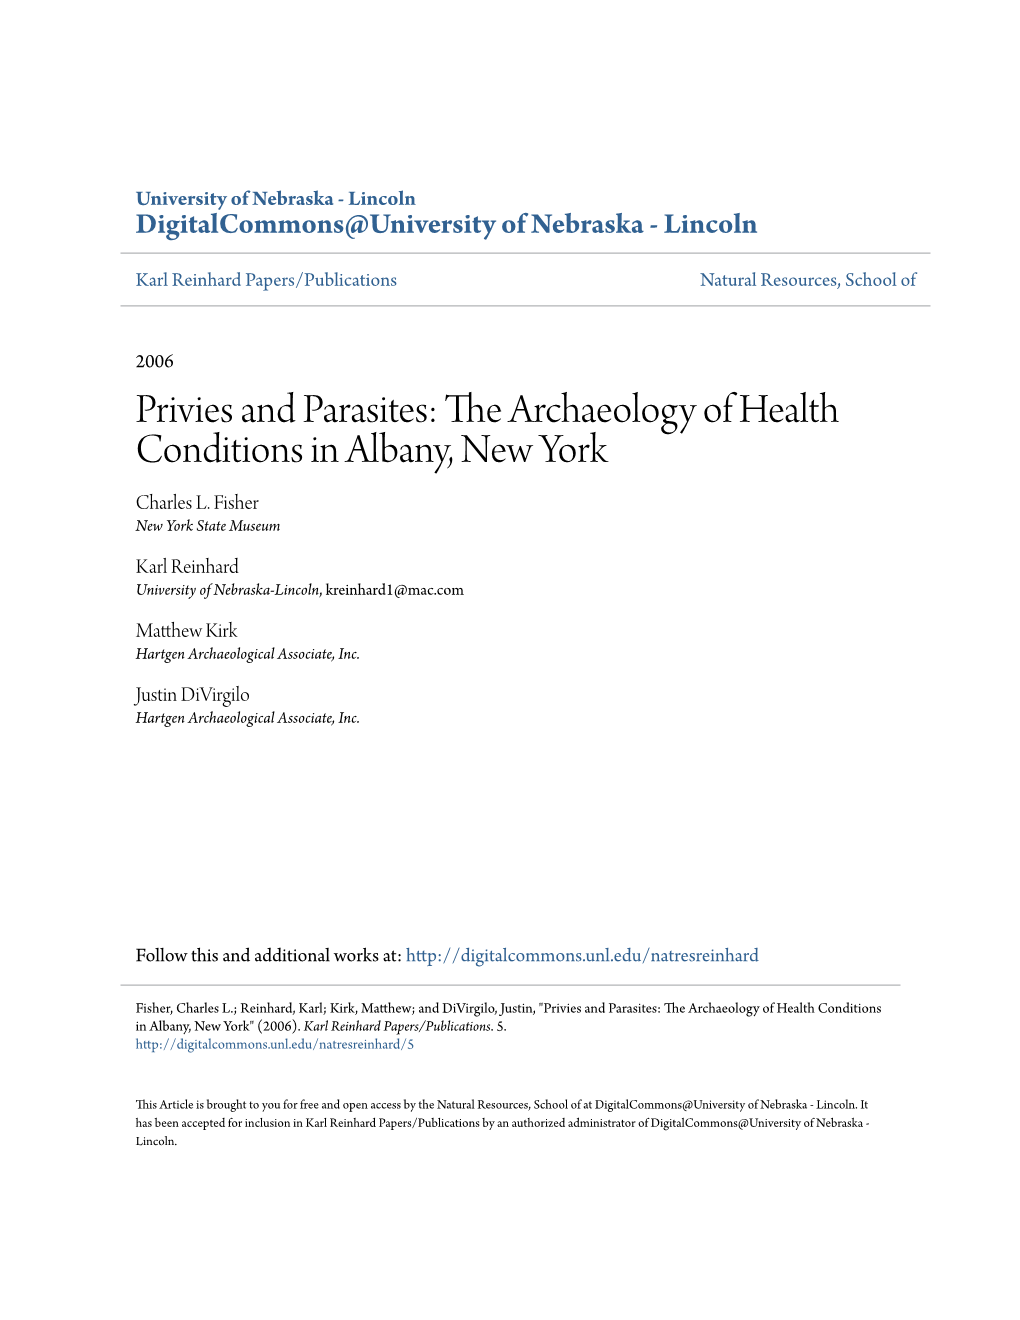 Privies and Parasites: the Archaeology of Health Conditions in Albany, New York Charles L